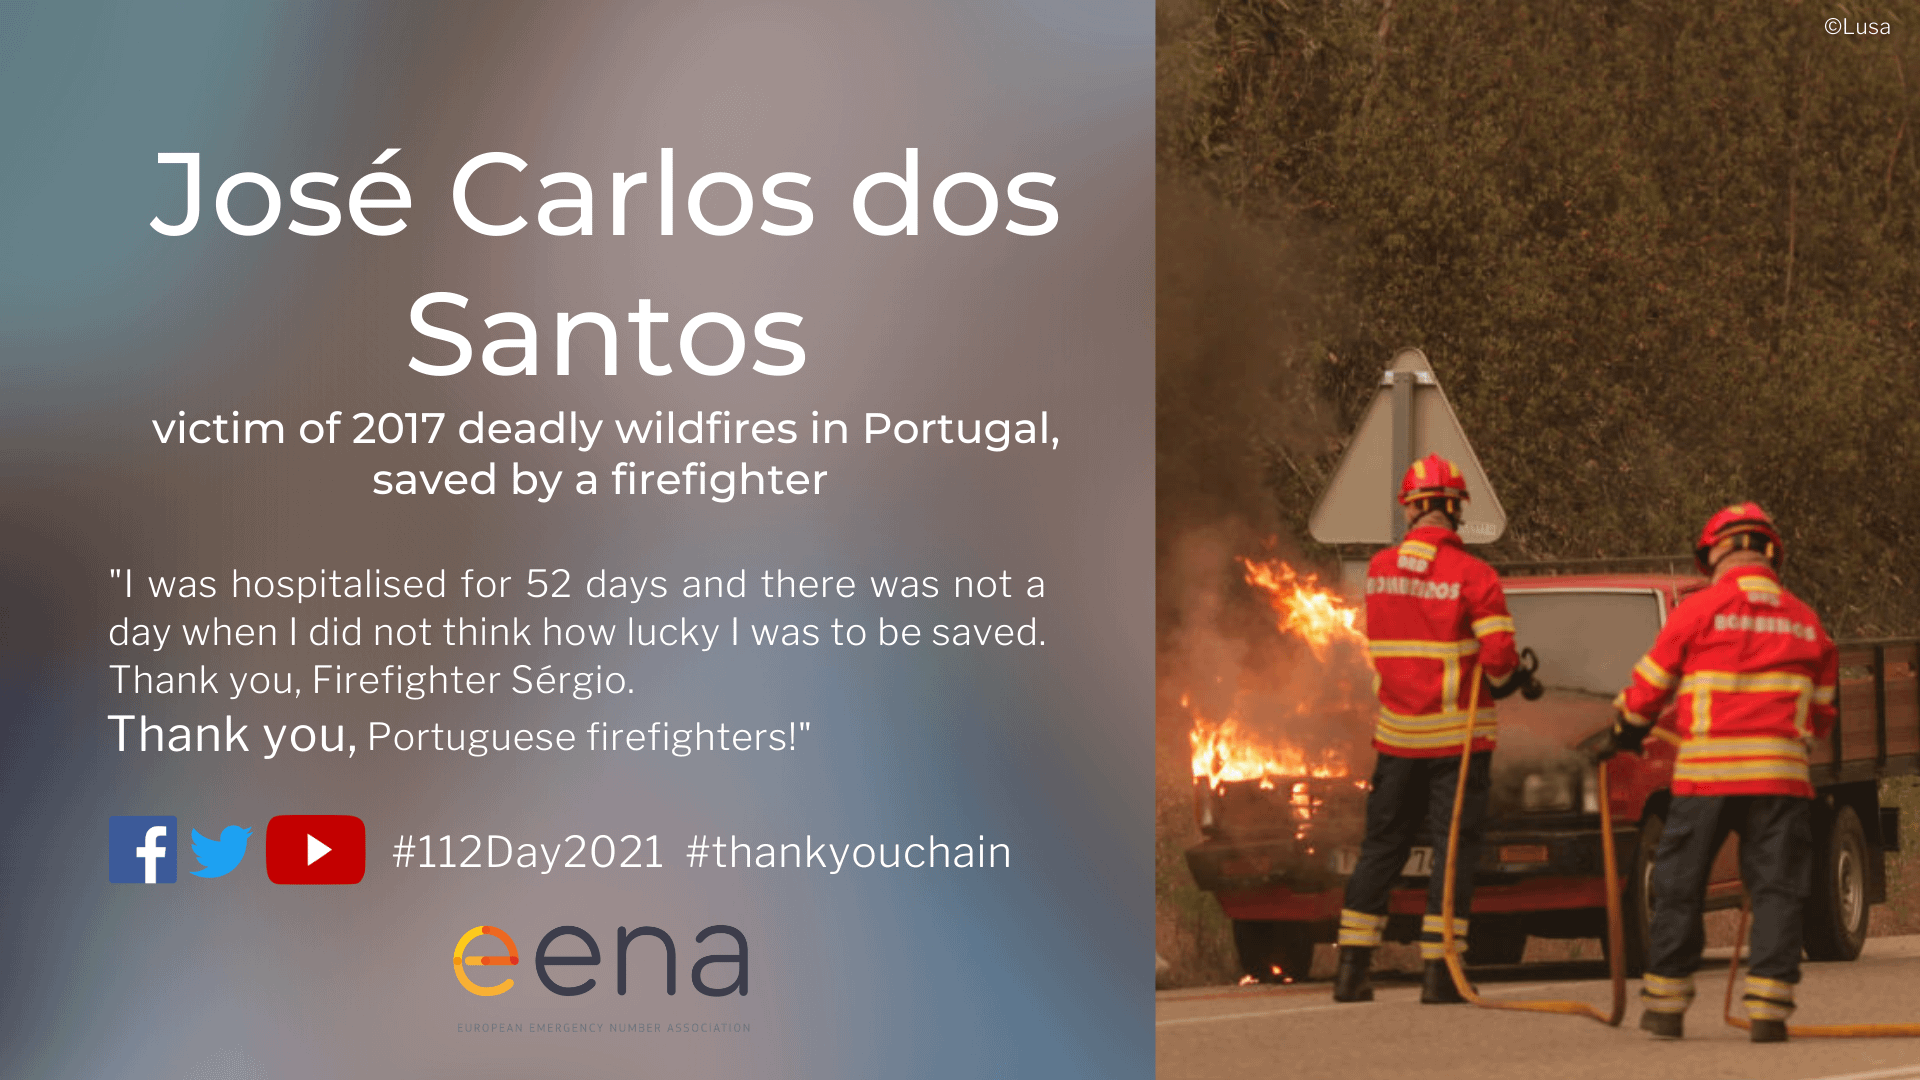 José Carlos dos Santos thanks the firefighter who saved his life